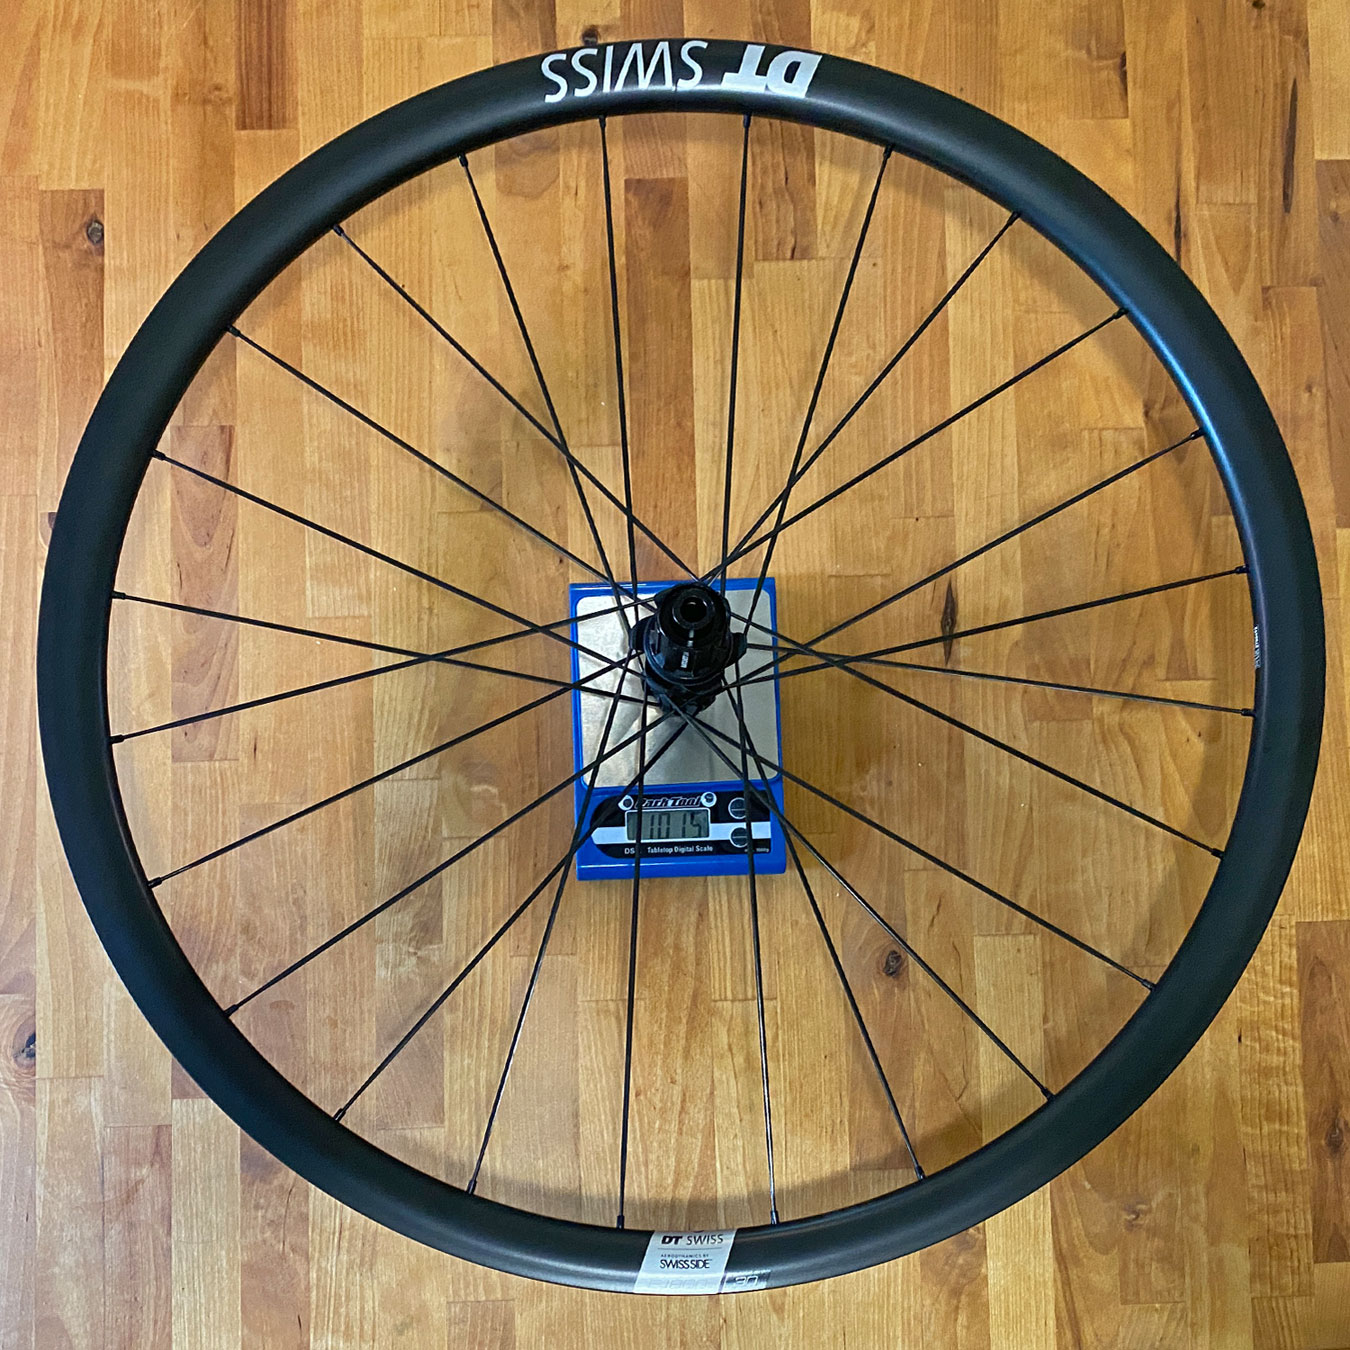 DT Swiss E 1800 Review affordable aero aluminum alloy endurance all-road wheels, 1015g actual weight rear